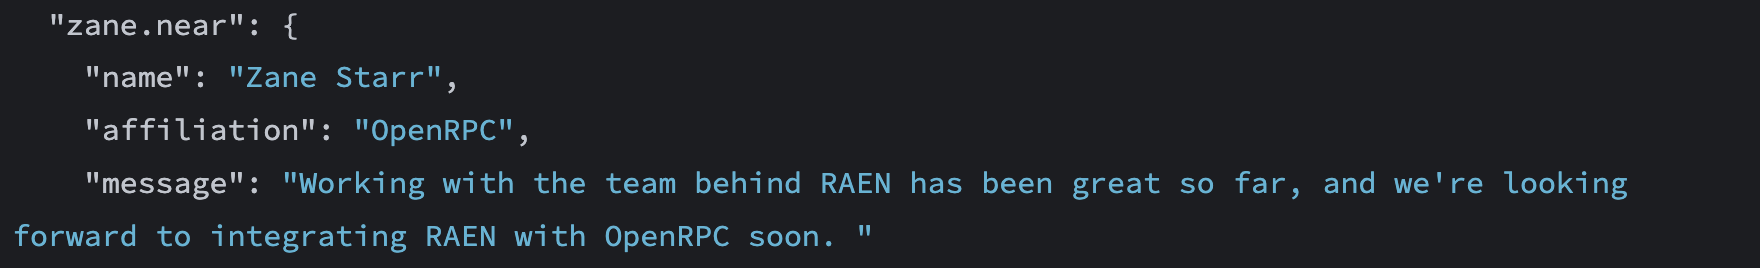 Working with the team behind RAEN has been great so far, and we're looking forward to integrating RAEN with OpenRPC soon.